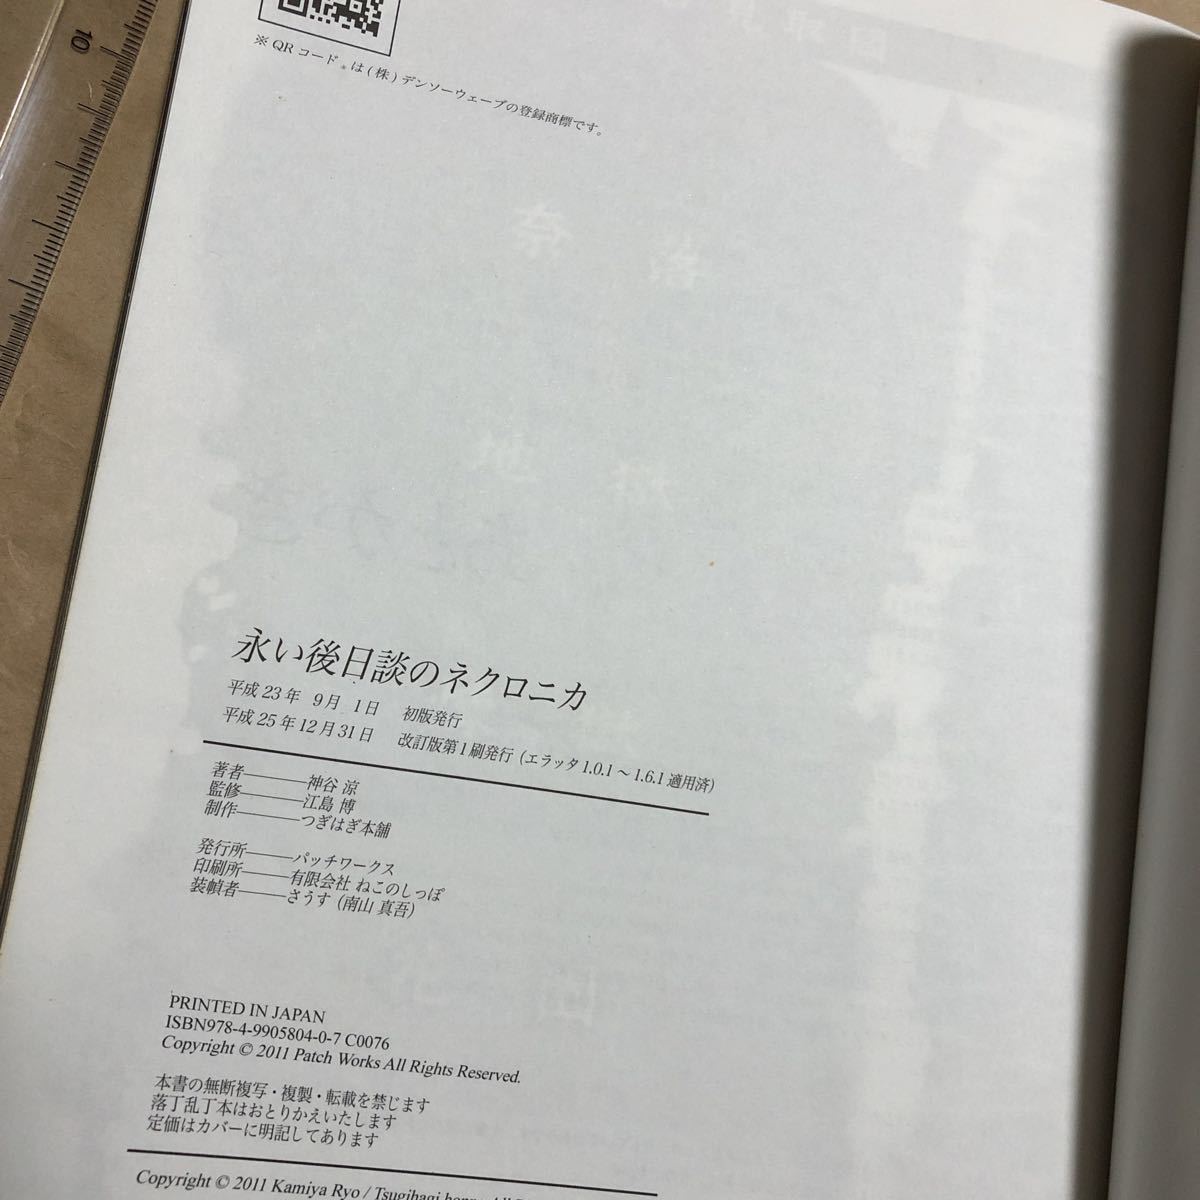 TRPG 永い後日談のネクロニカ ルールブック エラッタ1.0.1～1.6.1適用済の改訂版 product details | Yahoo!  Auctions Japan proxy bidding and shopping service | FROM JAPAN